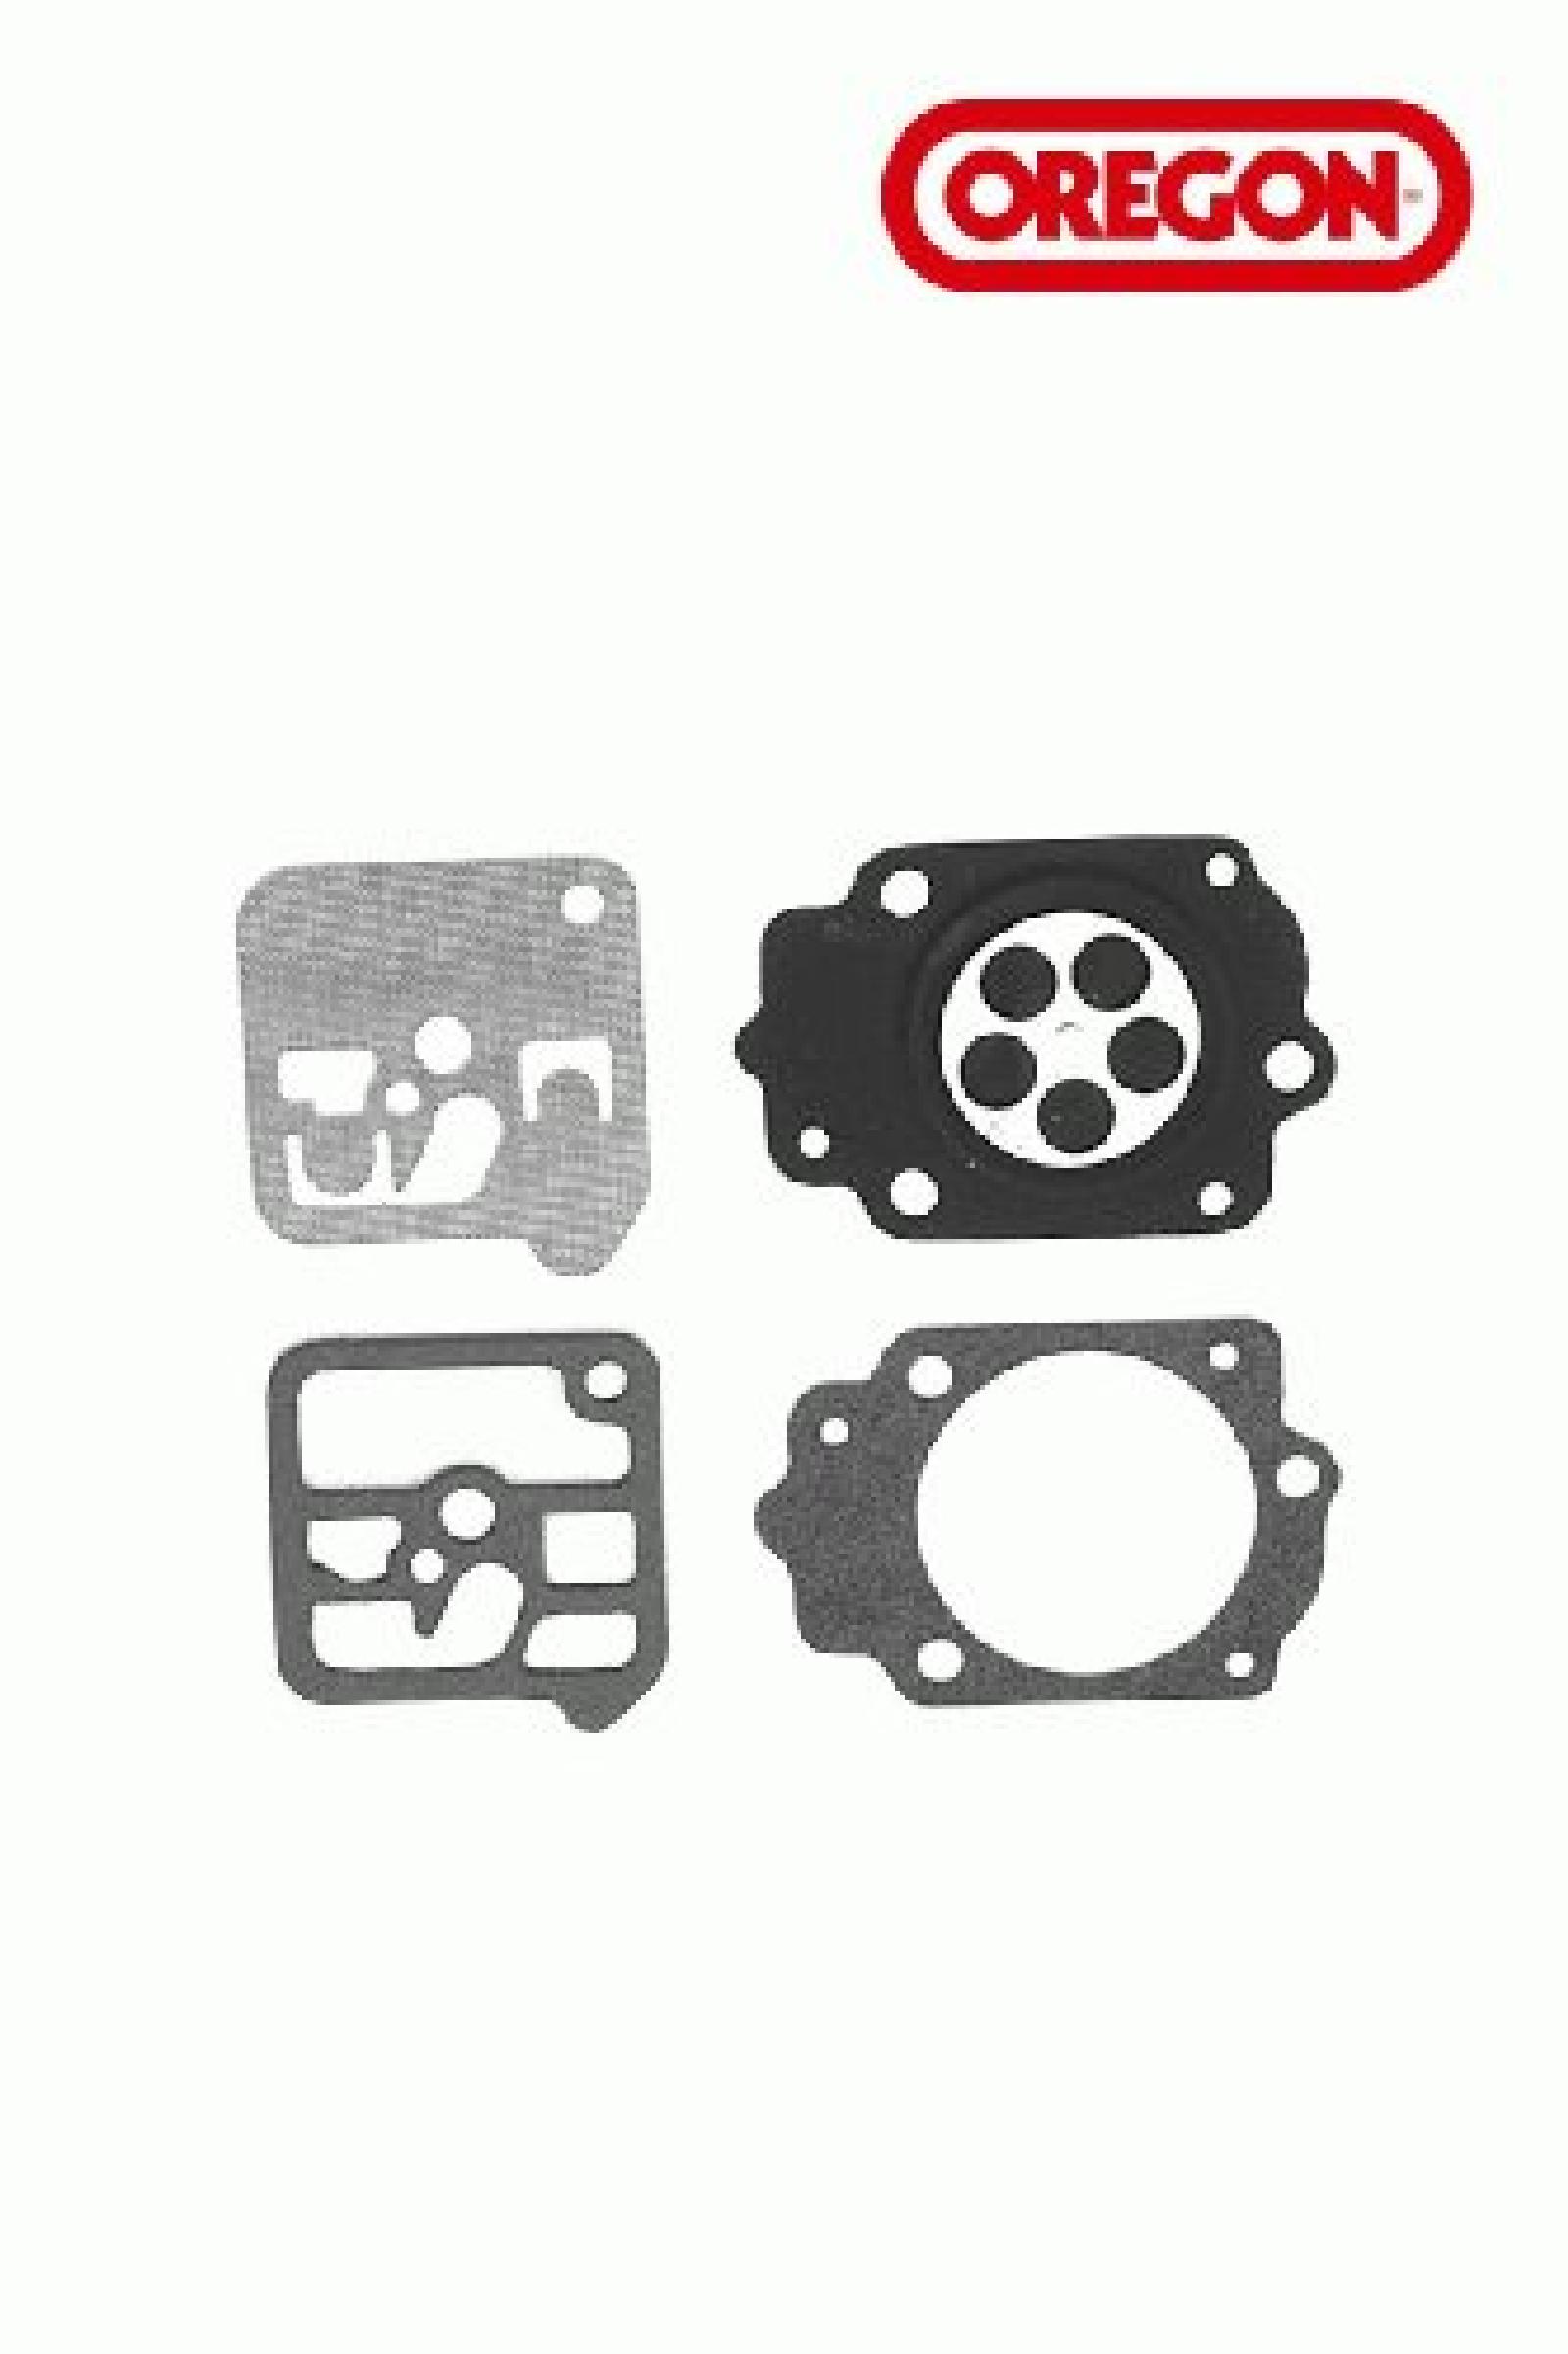 KIT GASKET AND DIAPHRAGM part# 49-800 by Oregon - Click Image to Close